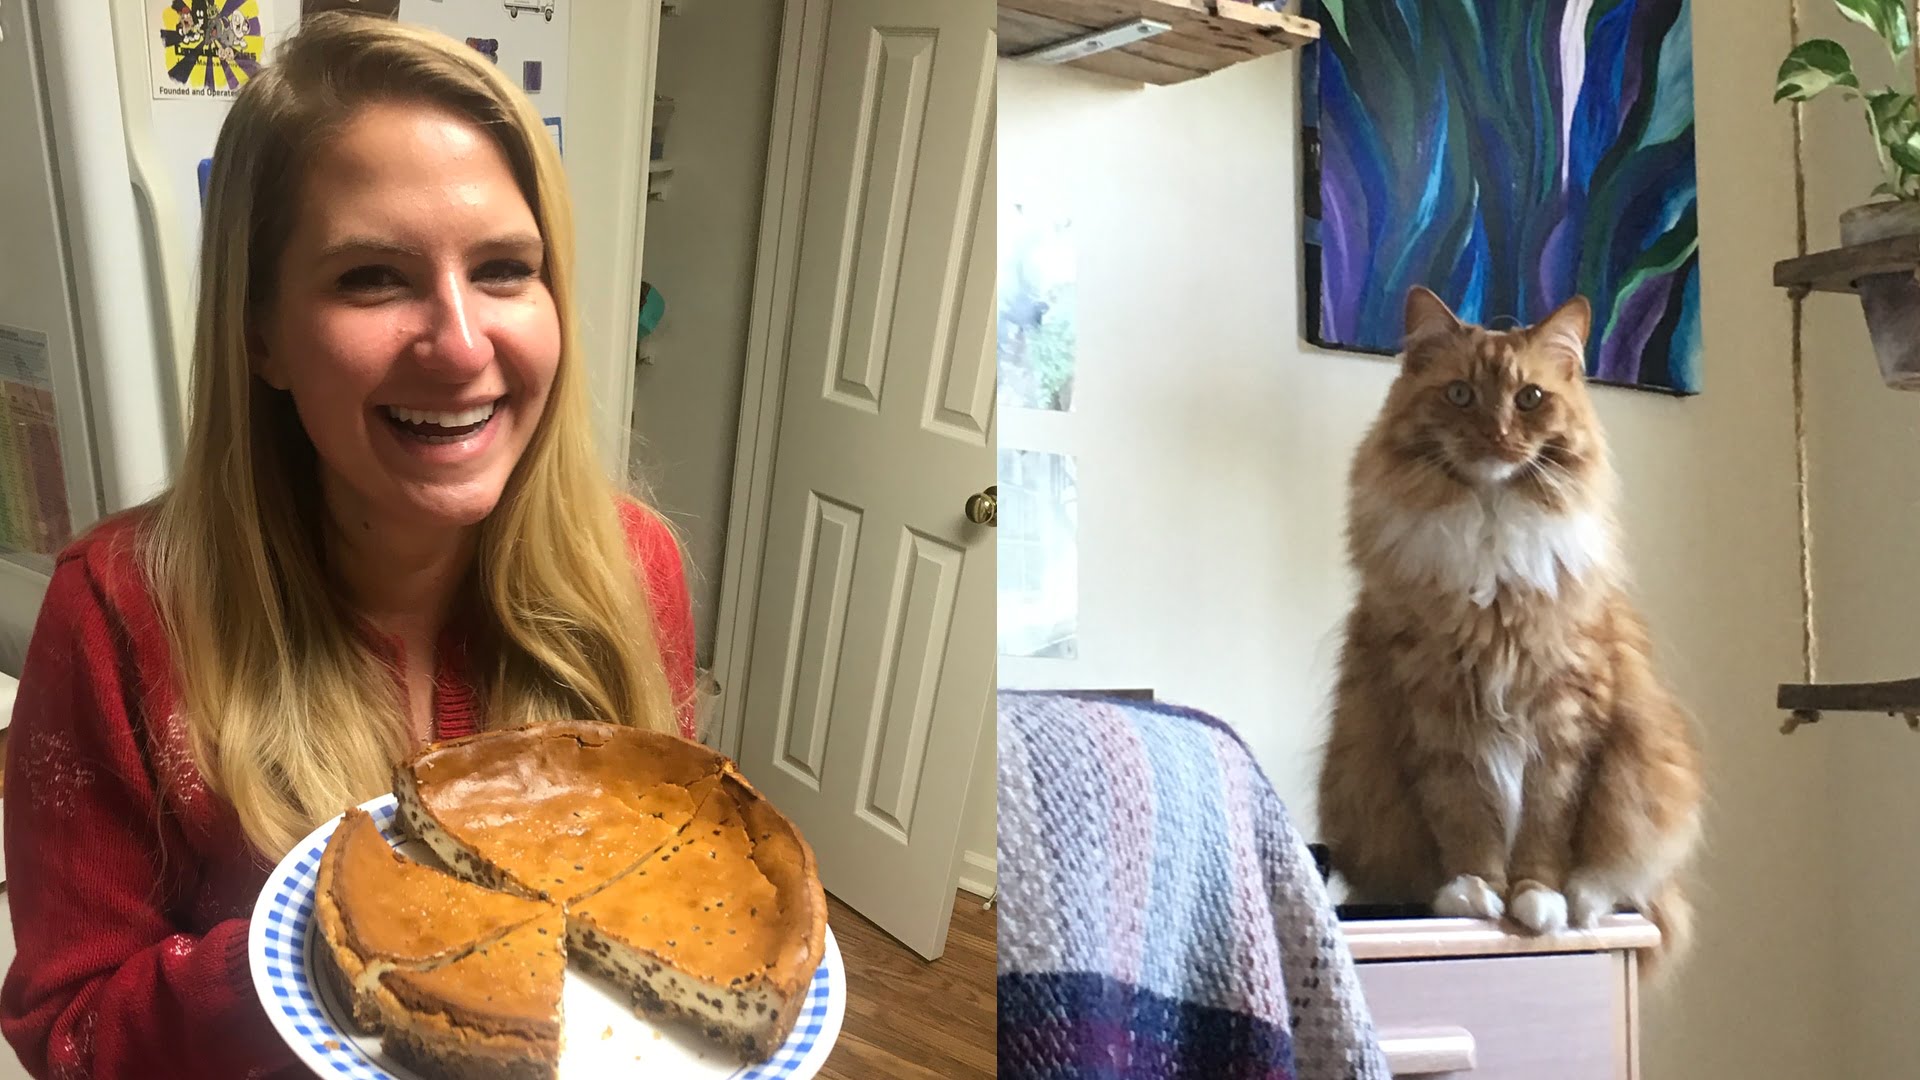 India Hagen-Gates with a pie and her cat.